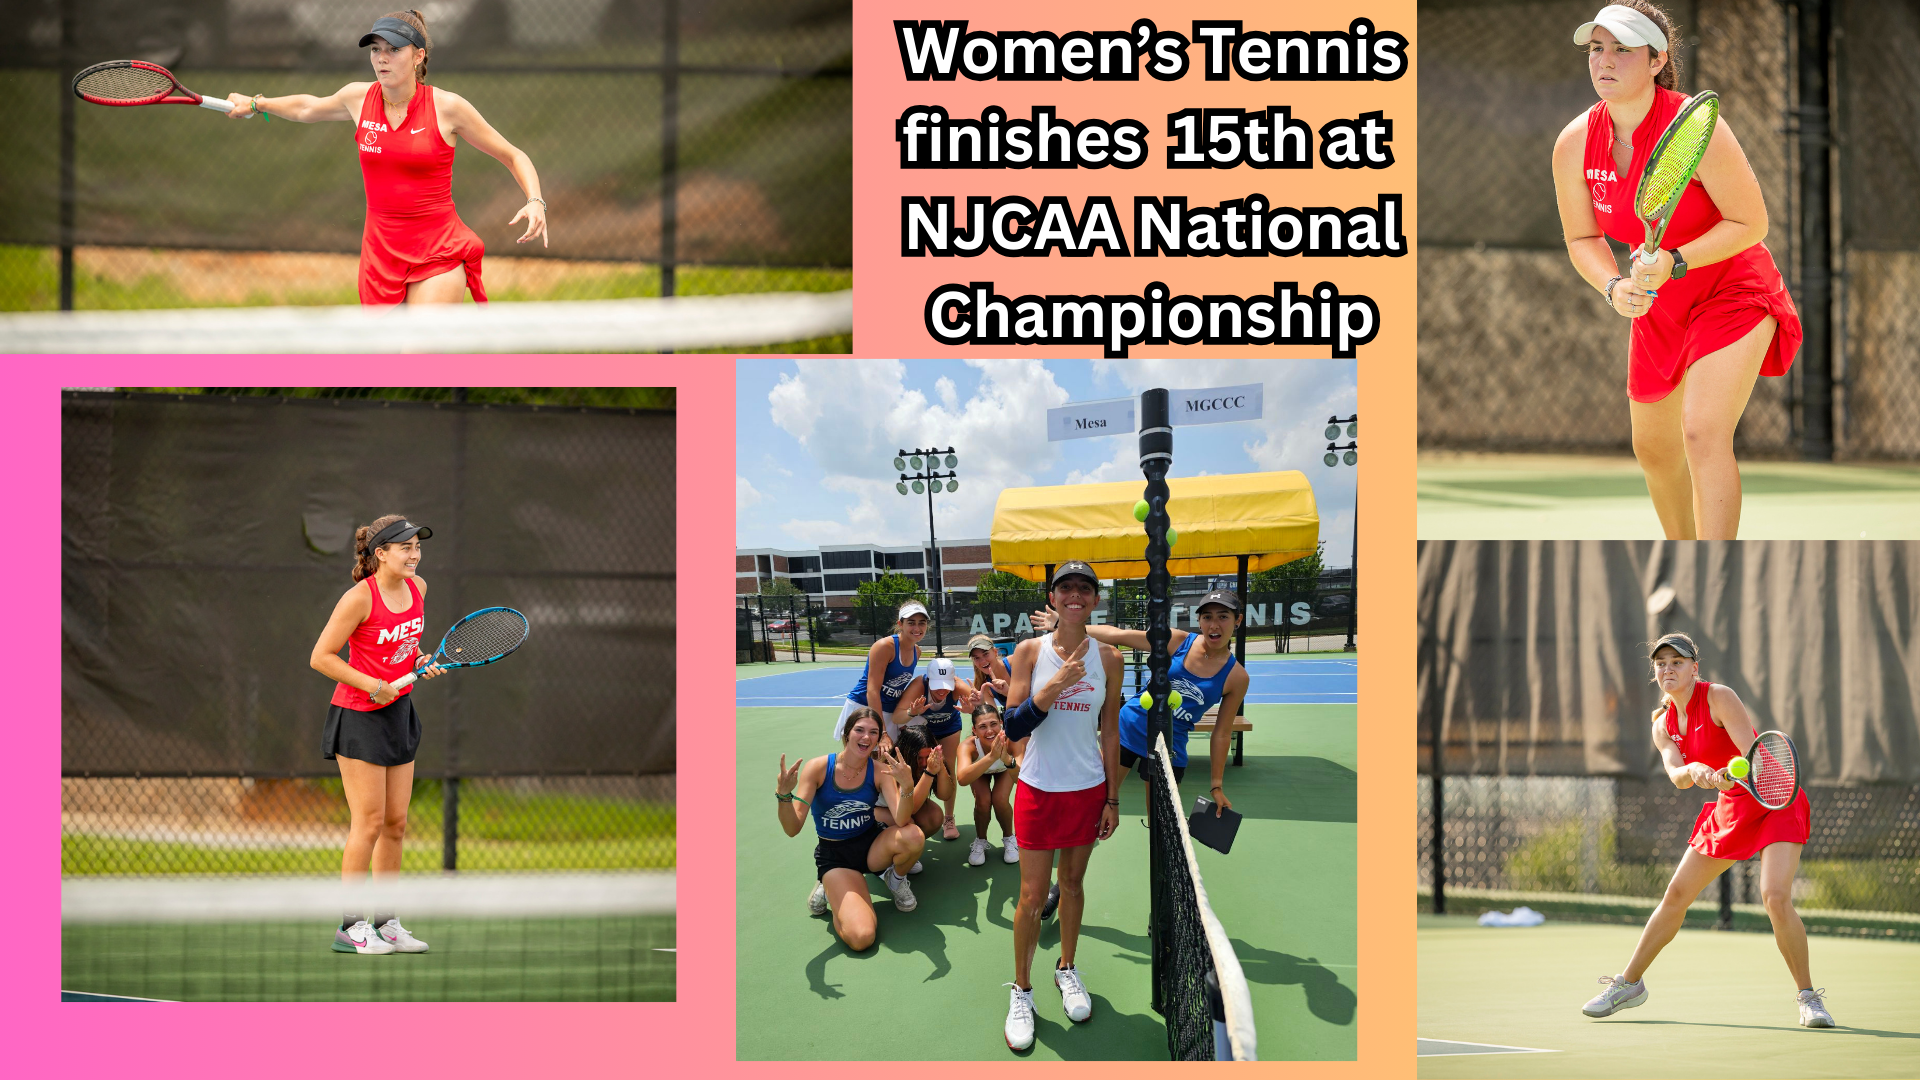 Women's Tennis earns best finish at National Championship since 2017